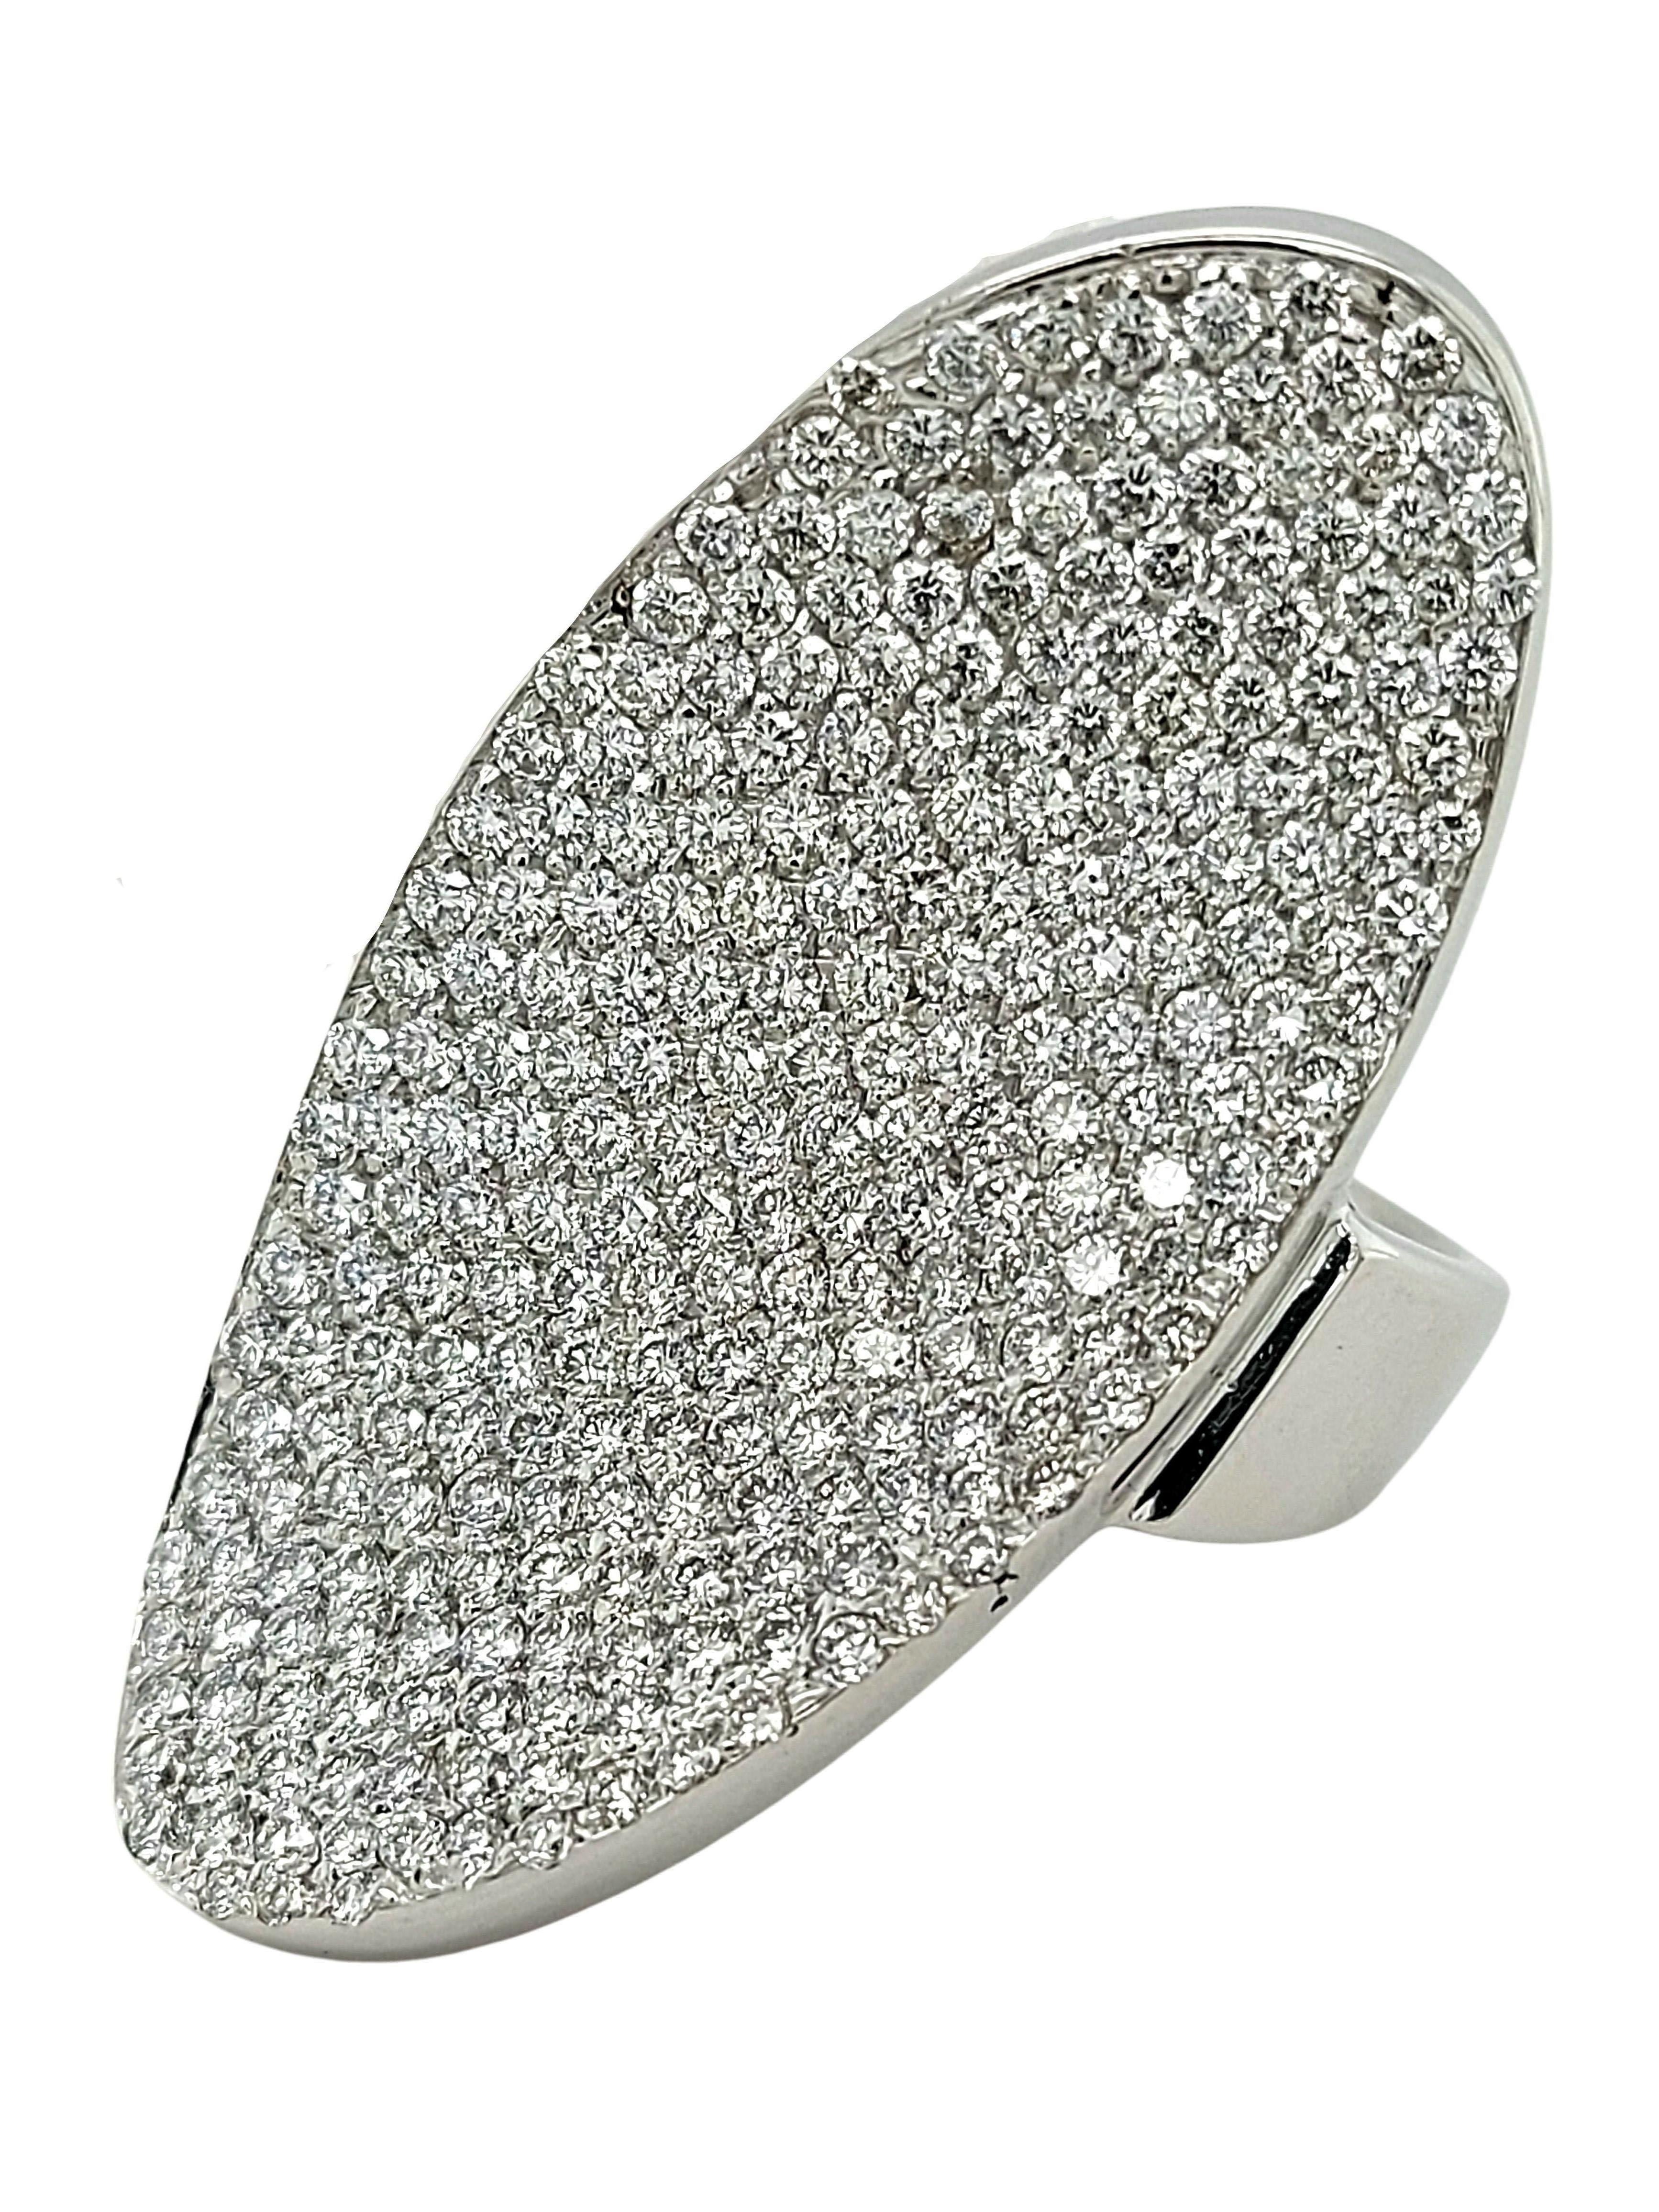 Gorgeous 18kt Whit Gold Mattioli Hiroko Ring Pave Set With Diamonds

Diamonds: 264 brilliant cut diamonds

Material: 18kt White gold

Ring size: 51.9 EU / 6 US ( can be resized for free)

Total weight: 14.8 gram / 0.520 oz  / 9.45 dwt

Measurements: